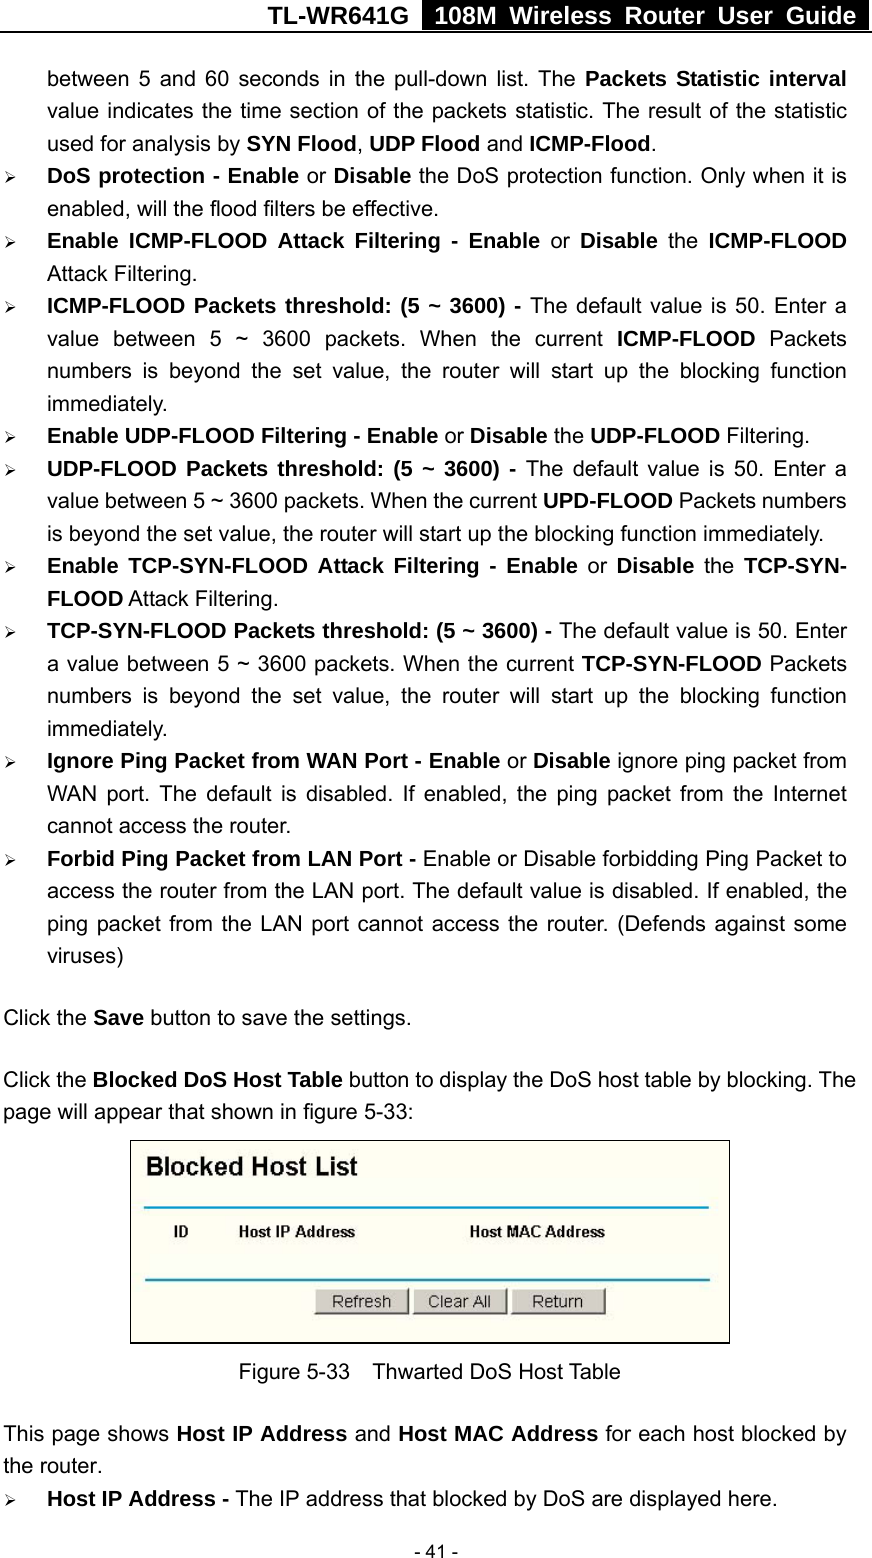 TL-WR641G   108M Wireless Router User Guide   - 41 -between 5 and 60 seconds in the pull-down list. The Packets Statistic interval value indicates the time section of the packets statistic. The result of the statistic used for analysis by SYN Flood, UDP Flood and ICMP-Flood. ¾ DoS protection - Enable or Disable the DoS protection function. Only when it is enabled, will the flood filters be effective. ¾ Enable ICMP-FLOOD Attack Filtering - Enable or Disable the ICMP-FLOOD Attack Filtering. ¾ ICMP-FLOOD Packets threshold: (5 ~ 3600) - The default value is 50. Enter a value between 5 ~ 3600 packets. When the current ICMP-FLOOD Packets numbers is beyond the set value, the router will start up the blocking function immediately. ¾ Enable UDP-FLOOD Filtering - Enable or Disable the UDP-FLOOD Filtering.   ¾ UDP-FLOOD Packets threshold: (5 ~ 3600) - The default value is 50. Enter a value between 5 ~ 3600 packets. When the current UPD-FLOOD Packets numbers is beyond the set value, the router will start up the blocking function immediately. ¾ Enable TCP-SYN-FLOOD Attack Filtering - Enable or Disable the TCP-SYN- FLOOD Attack Filtering. ¾ TCP-SYN-FLOOD Packets threshold: (5 ~ 3600) - The default value is 50. Enter a value between 5 ~ 3600 packets. When the current TCP-SYN-FLOOD Packets numbers is beyond the set value, the router will start up the blocking function immediately. ¾ Ignore Ping Packet from WAN Port - Enable or Disable ignore ping packet from WAN port. The default is disabled. If enabled, the ping packet from the Internet cannot access the router. ¾ Forbid Ping Packet from LAN Port - Enable or Disable forbidding Ping Packet to access the router from the LAN port. The default value is disabled. If enabled, the ping packet from the LAN port cannot access the router. (Defends against some viruses) Click the Save button to save the settings. Click the Blocked DoS Host Table button to display the DoS host table by blocking. The page will appear that shown in figure 5-33:  Figure 5-33  Thwarted DoS Host Table This page shows Host IP Address and Host MAC Address for each host blocked by the router.   ¾ Host IP Address - The IP address that blocked by DoS are displayed here. 